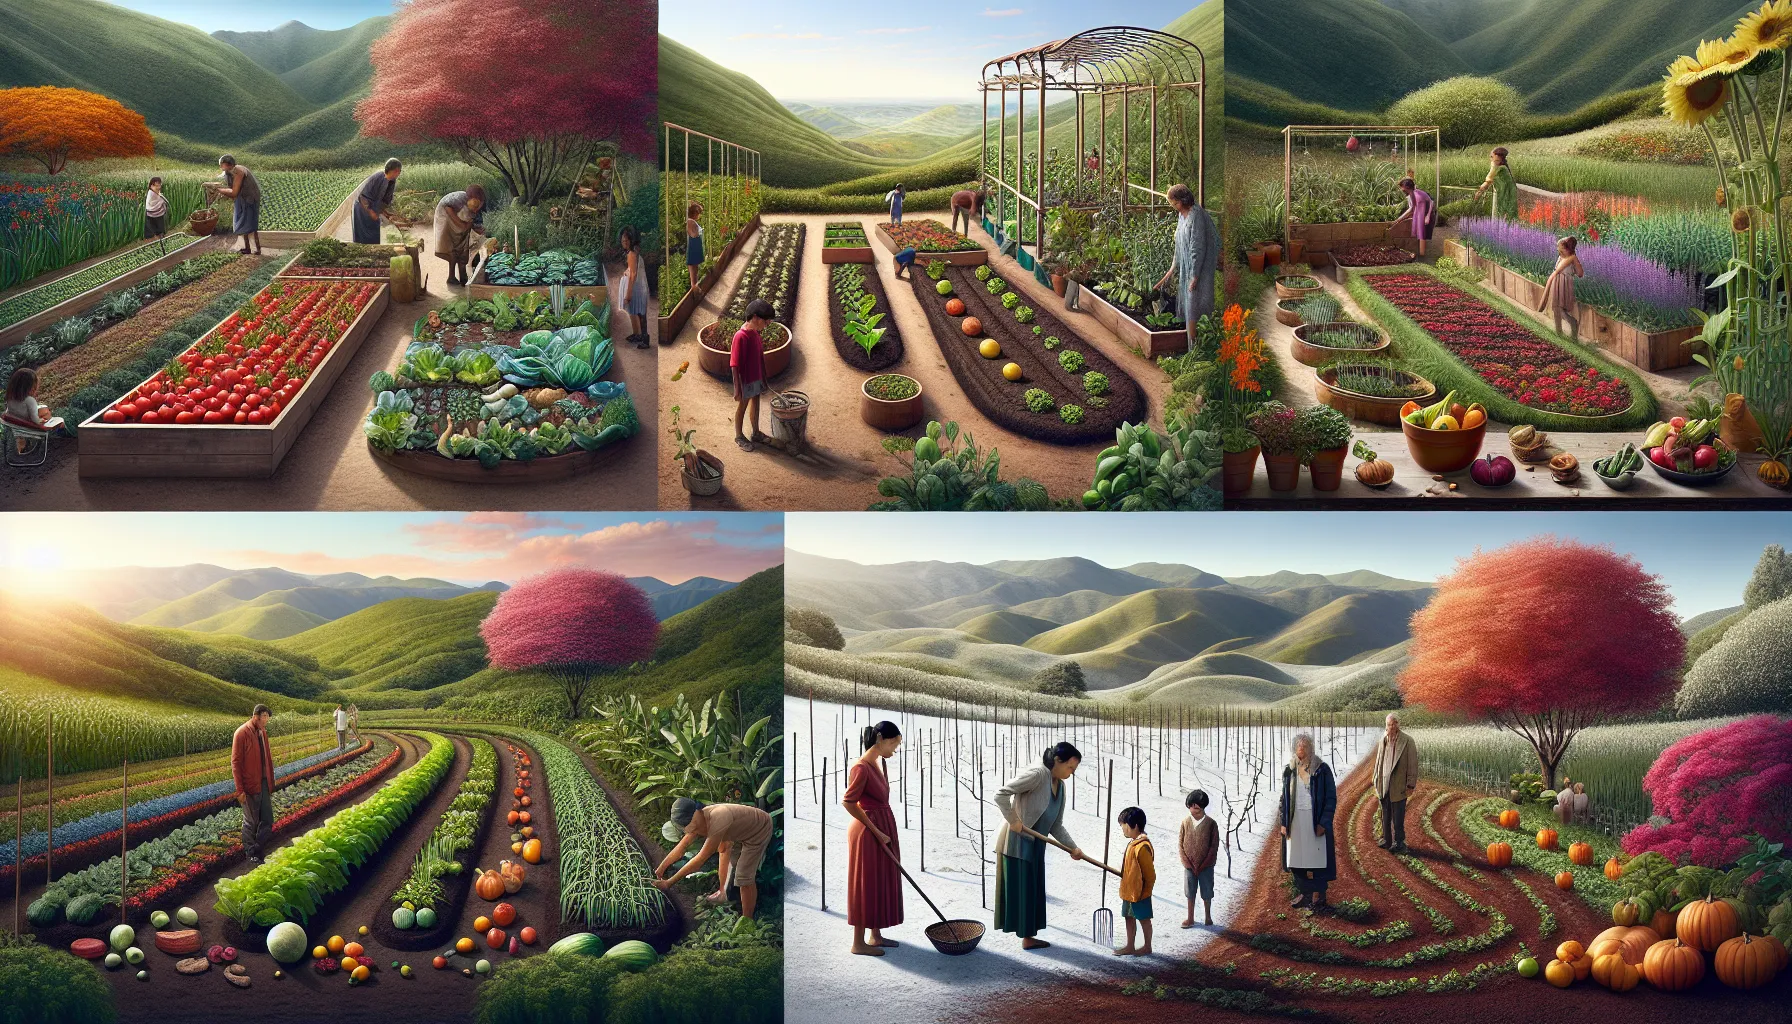 A panoramic illustration shows multiple people tending to various plants and vegetables in a lush, expansive garden with rolling hills in the background.